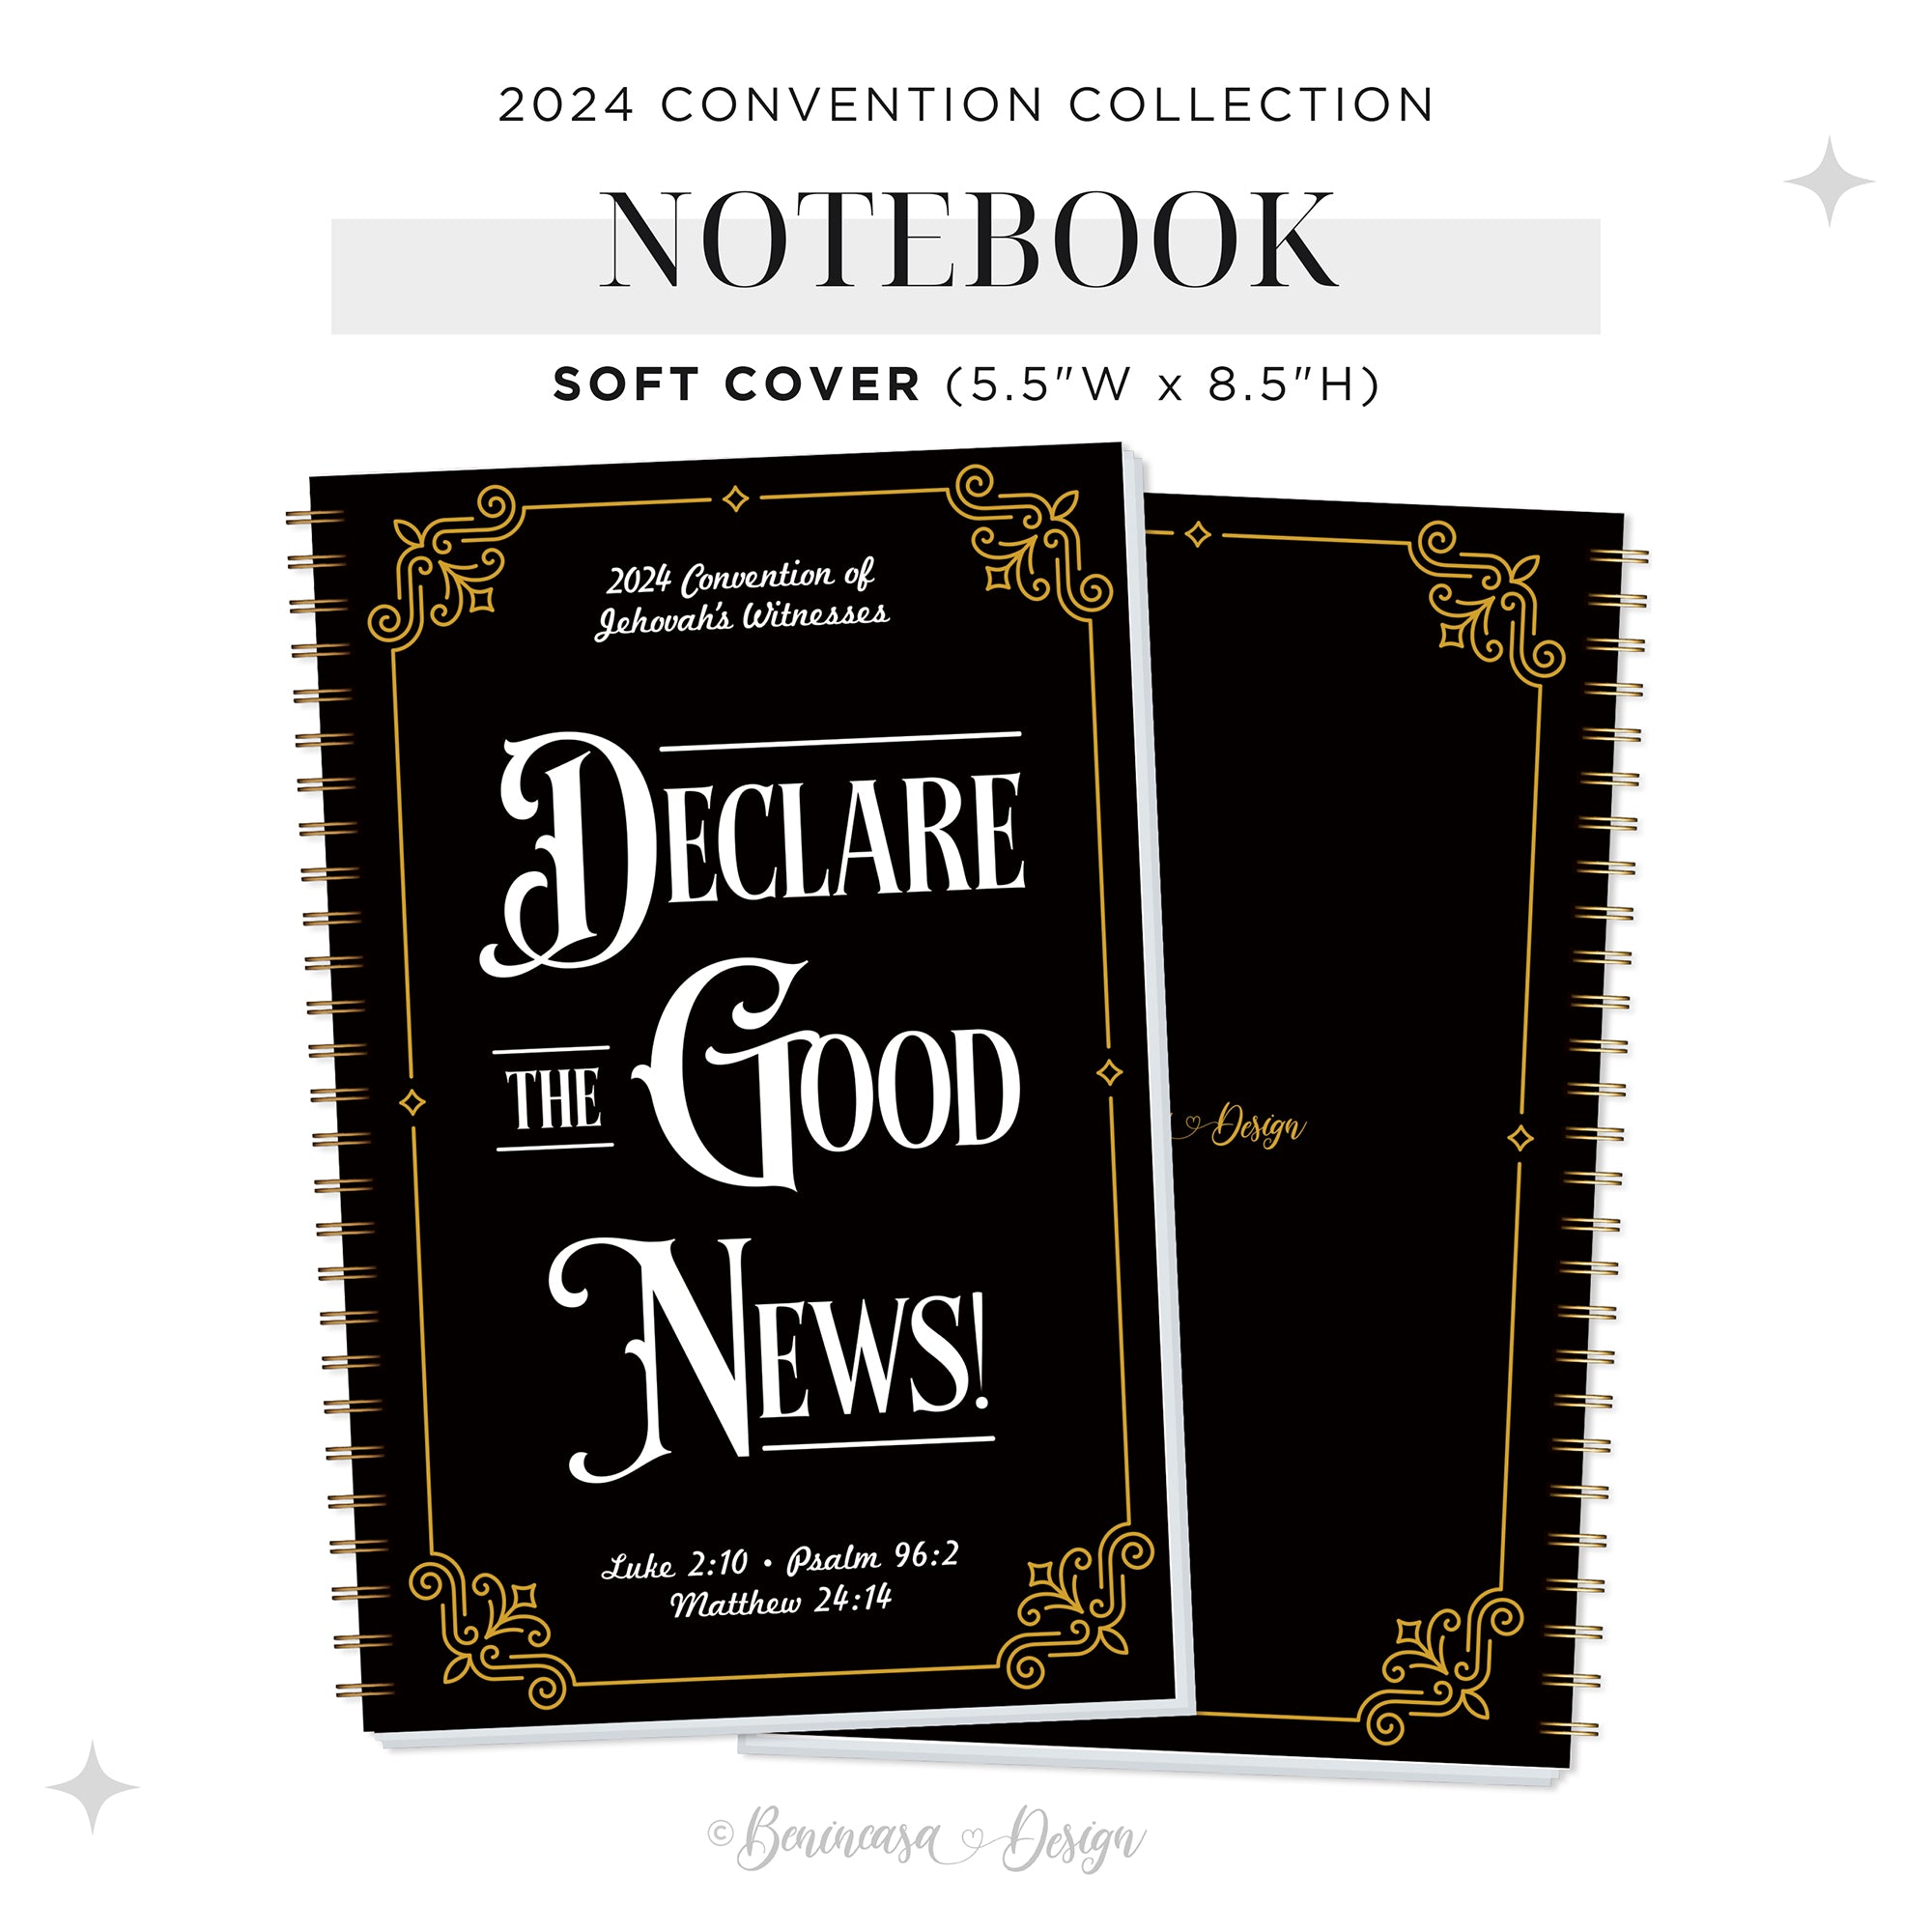 Notebook w/ Template: 2024 “Declare the Good News”!